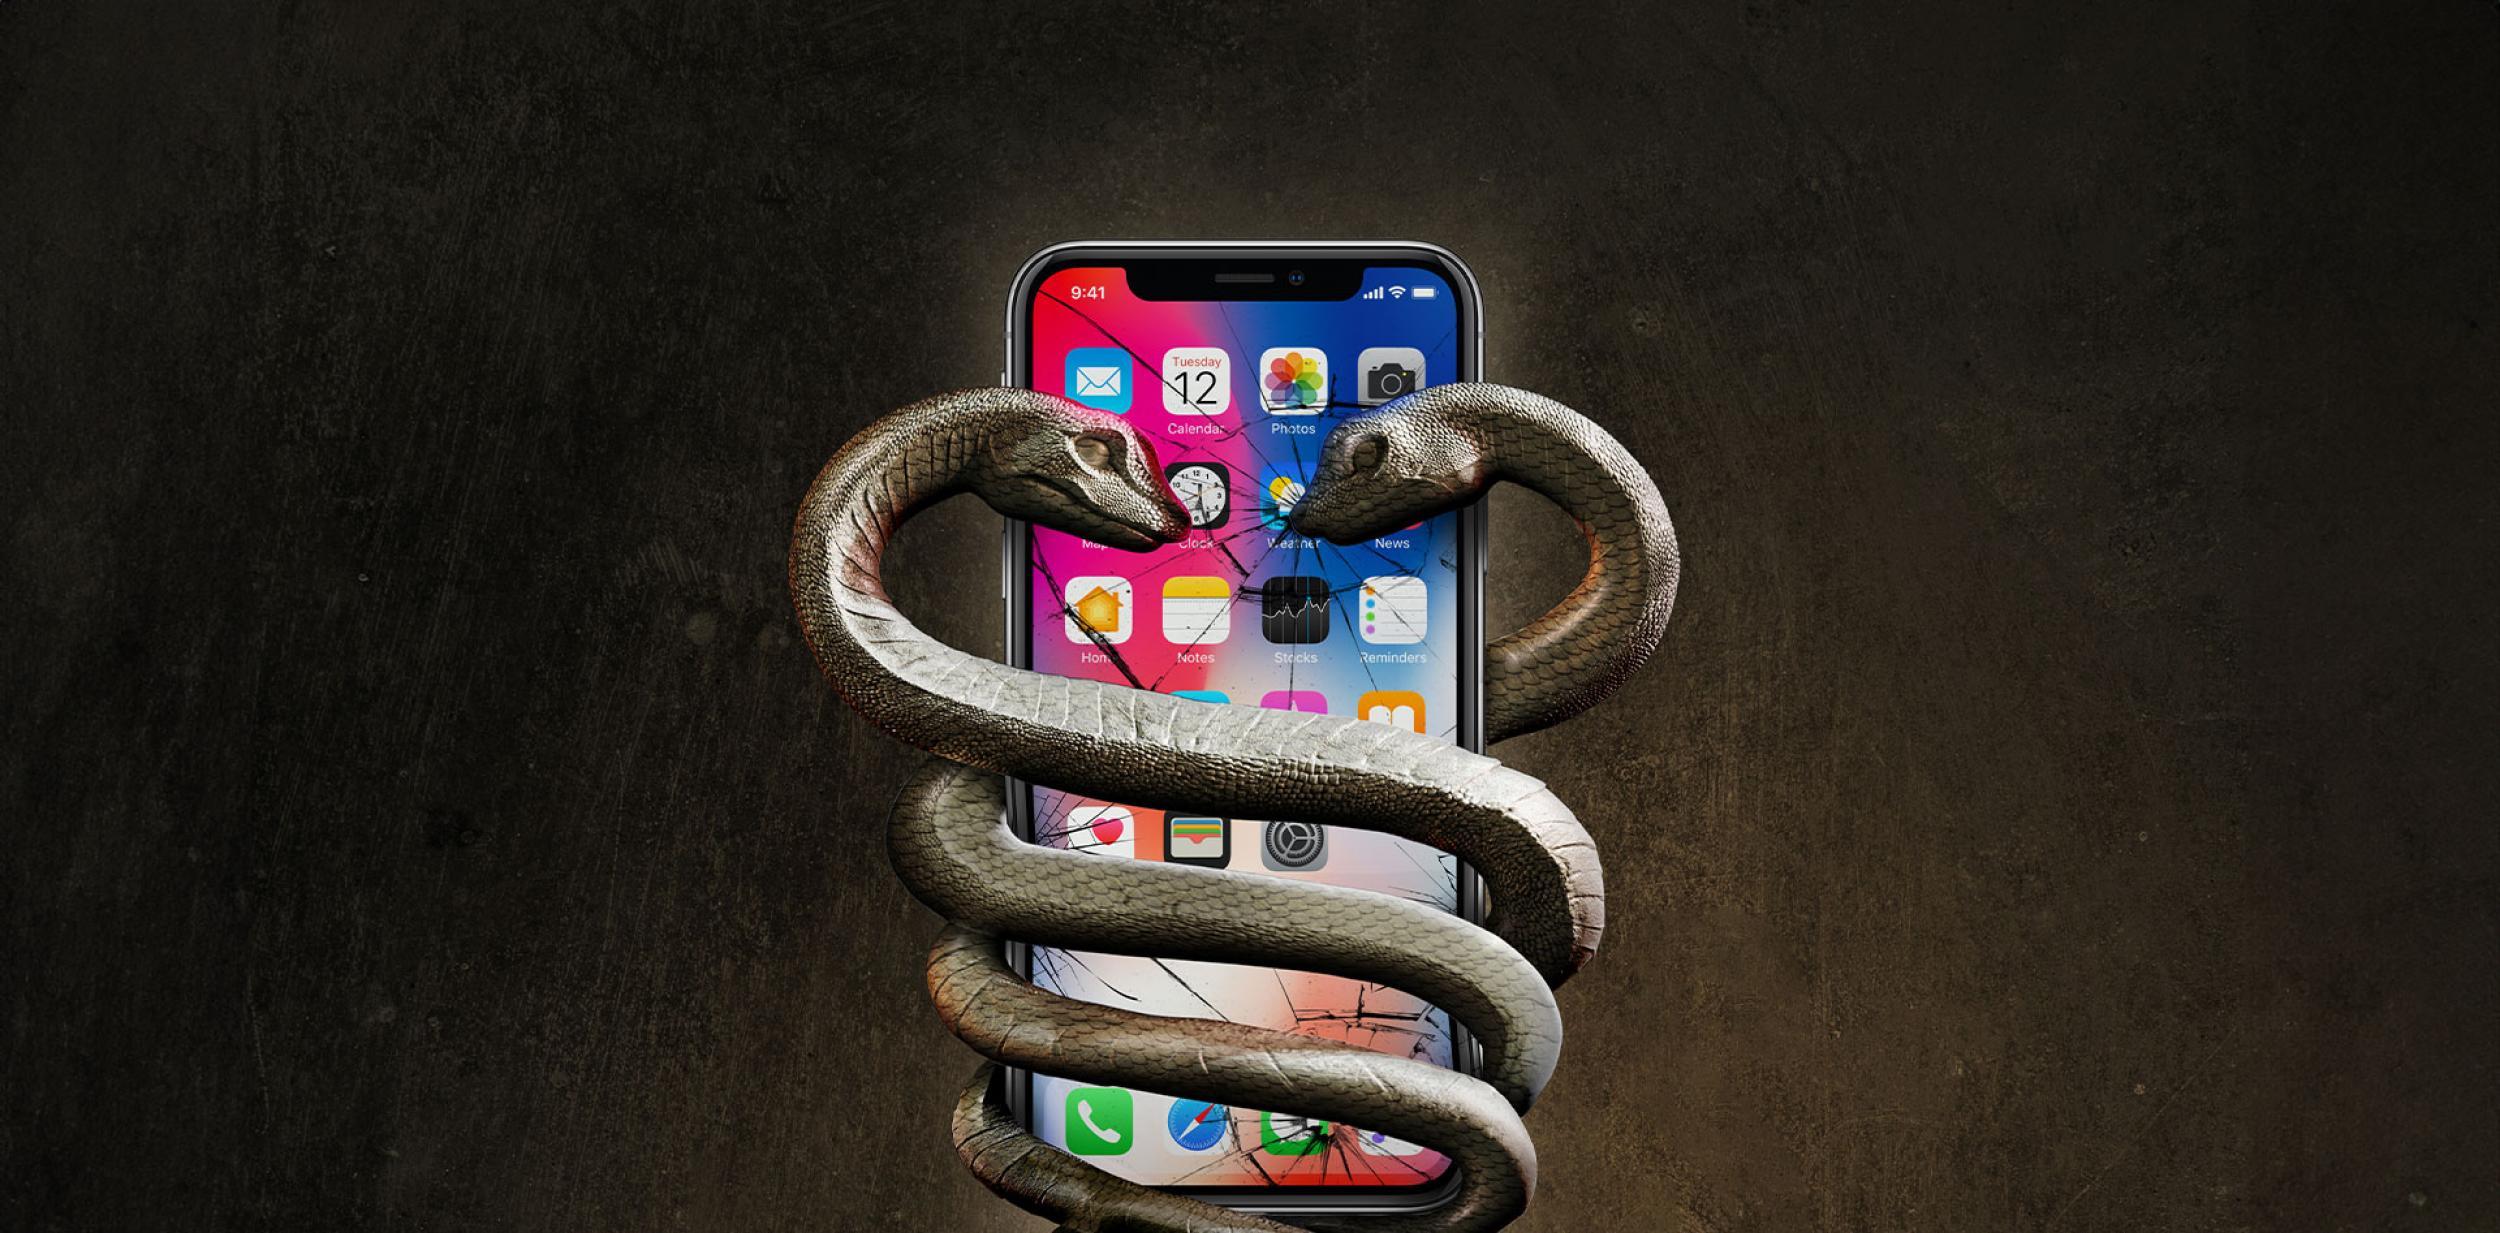 Two serpents wrapped around a mobile phone